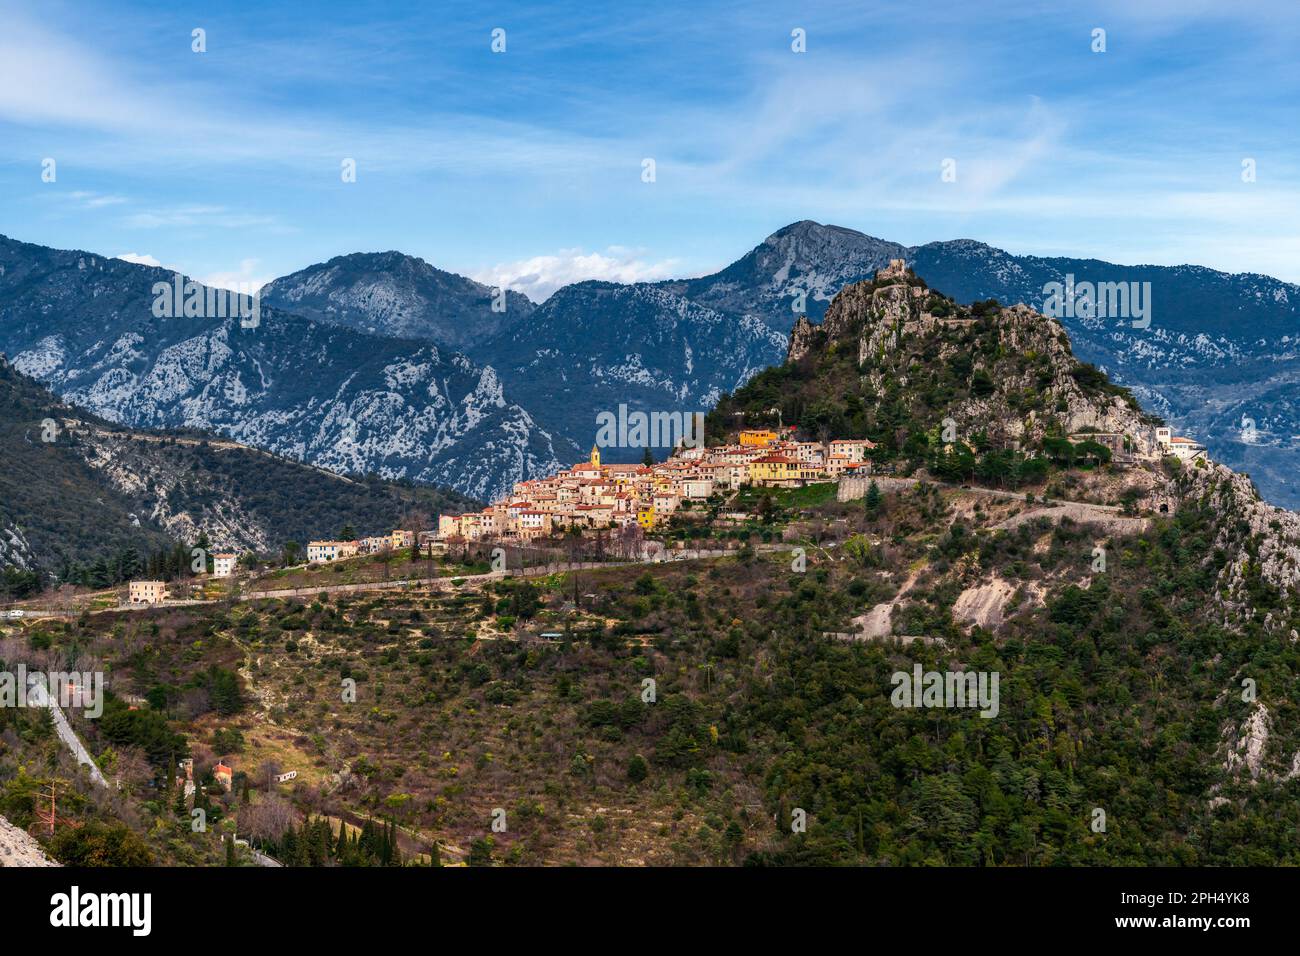 Landscape view of the idyllic coastal mountain village of Sainte-Agnes in the Alpes-Maritime region of the Cote d'Azur in southern France Stock Photo